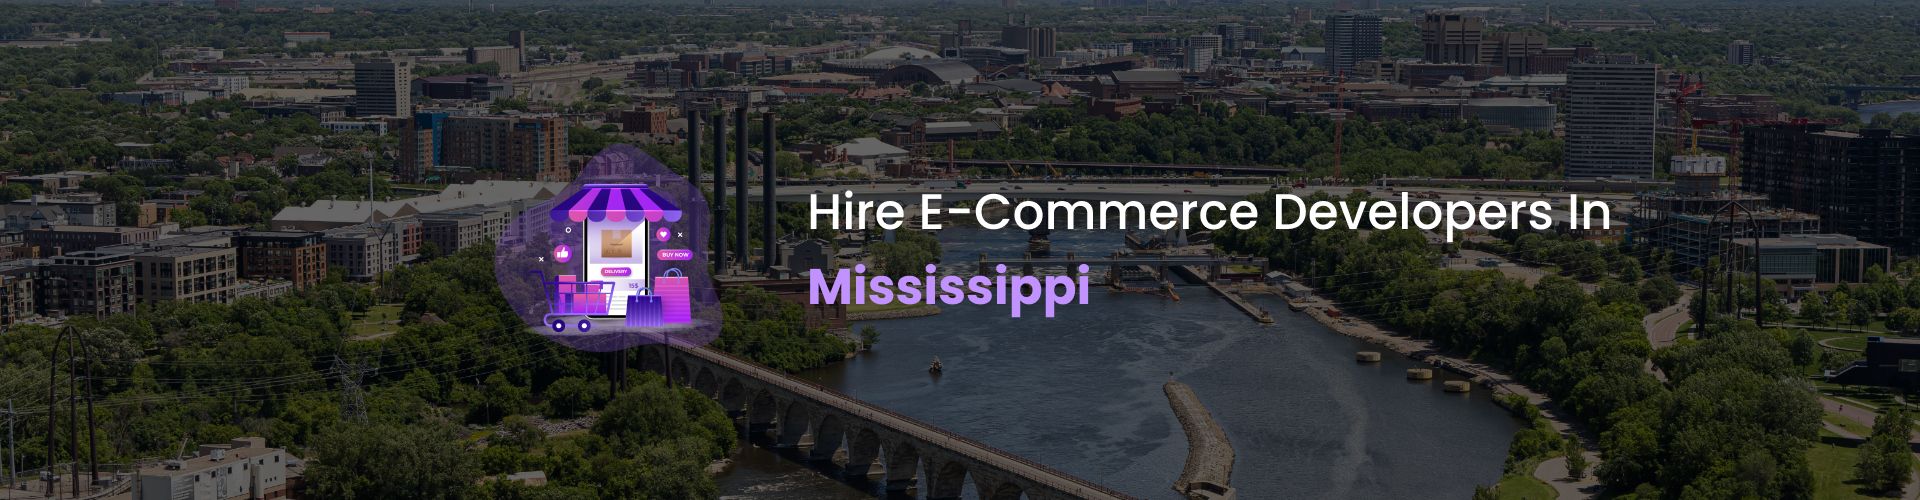 hire ecommerce developers in mississippi